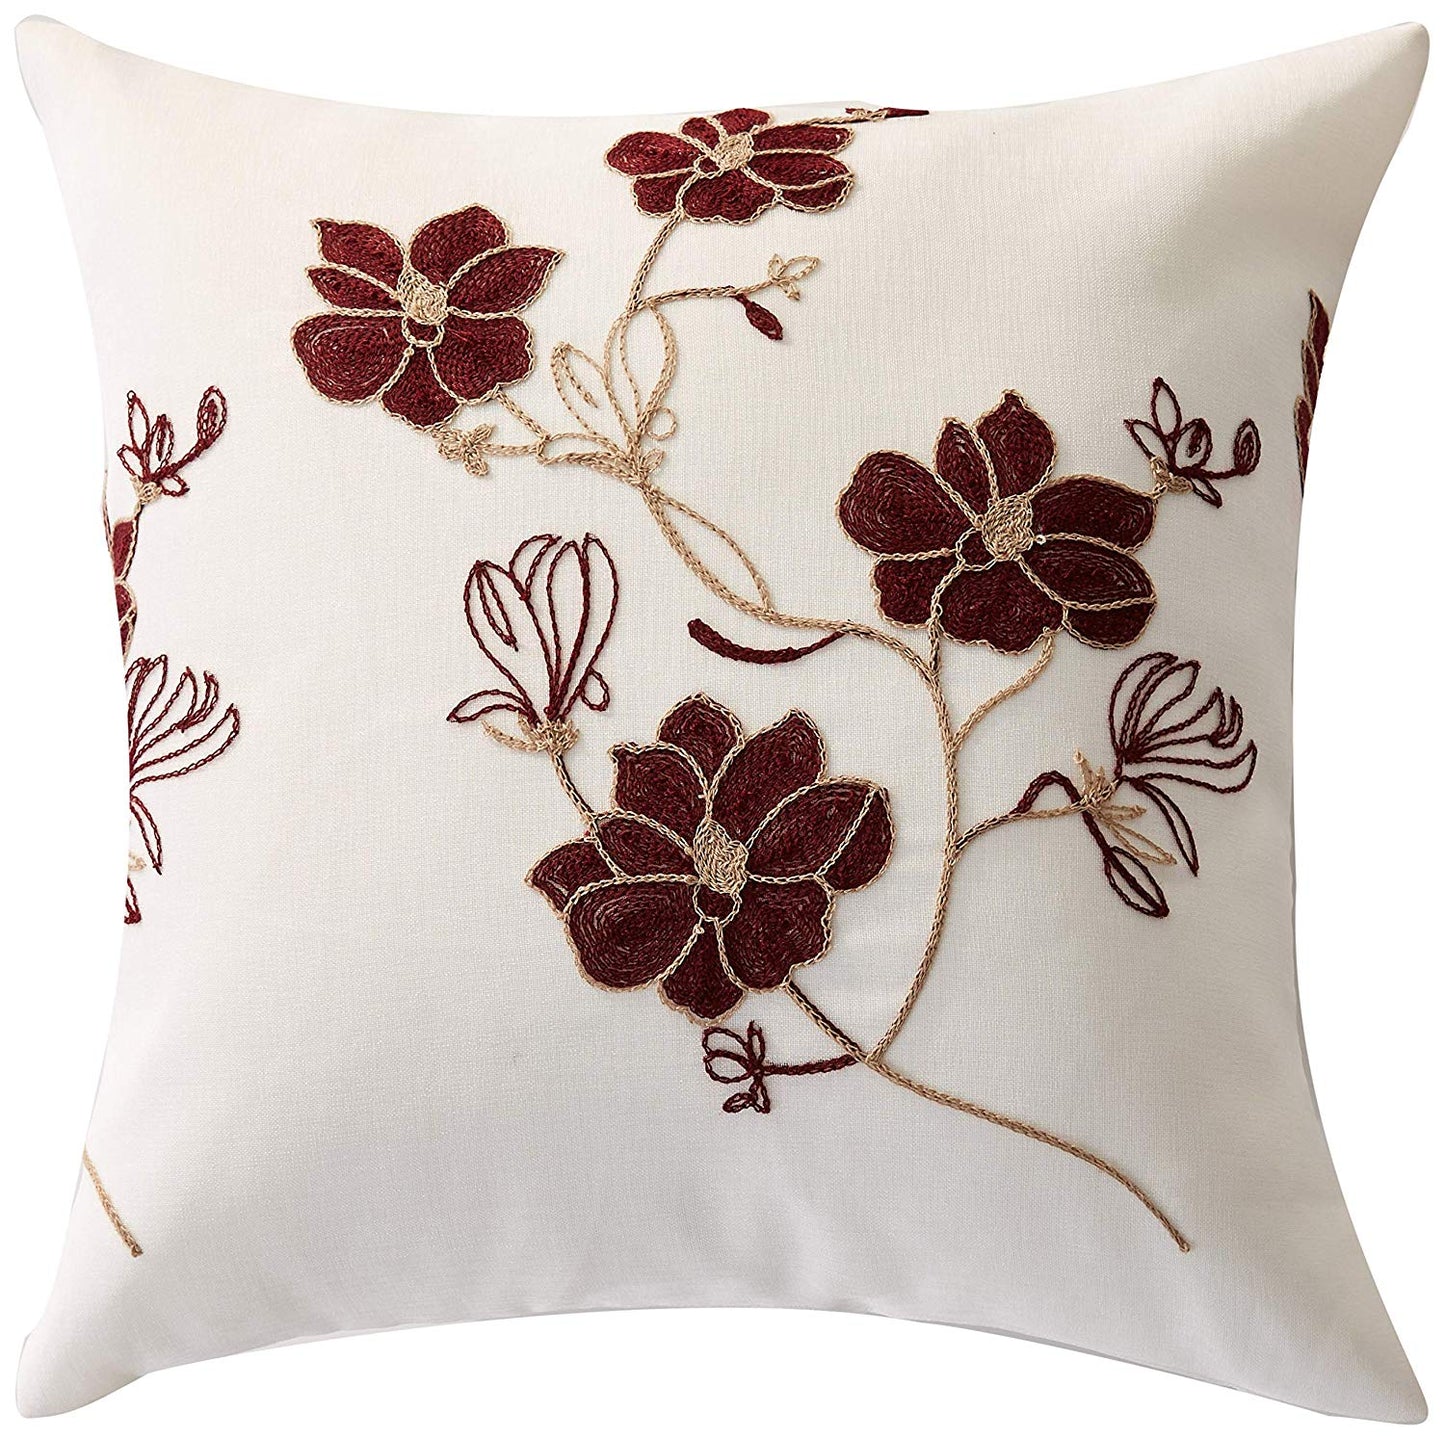 Marvelous Organza Embroidered Floral Design Decorative Accent Throw Pillow